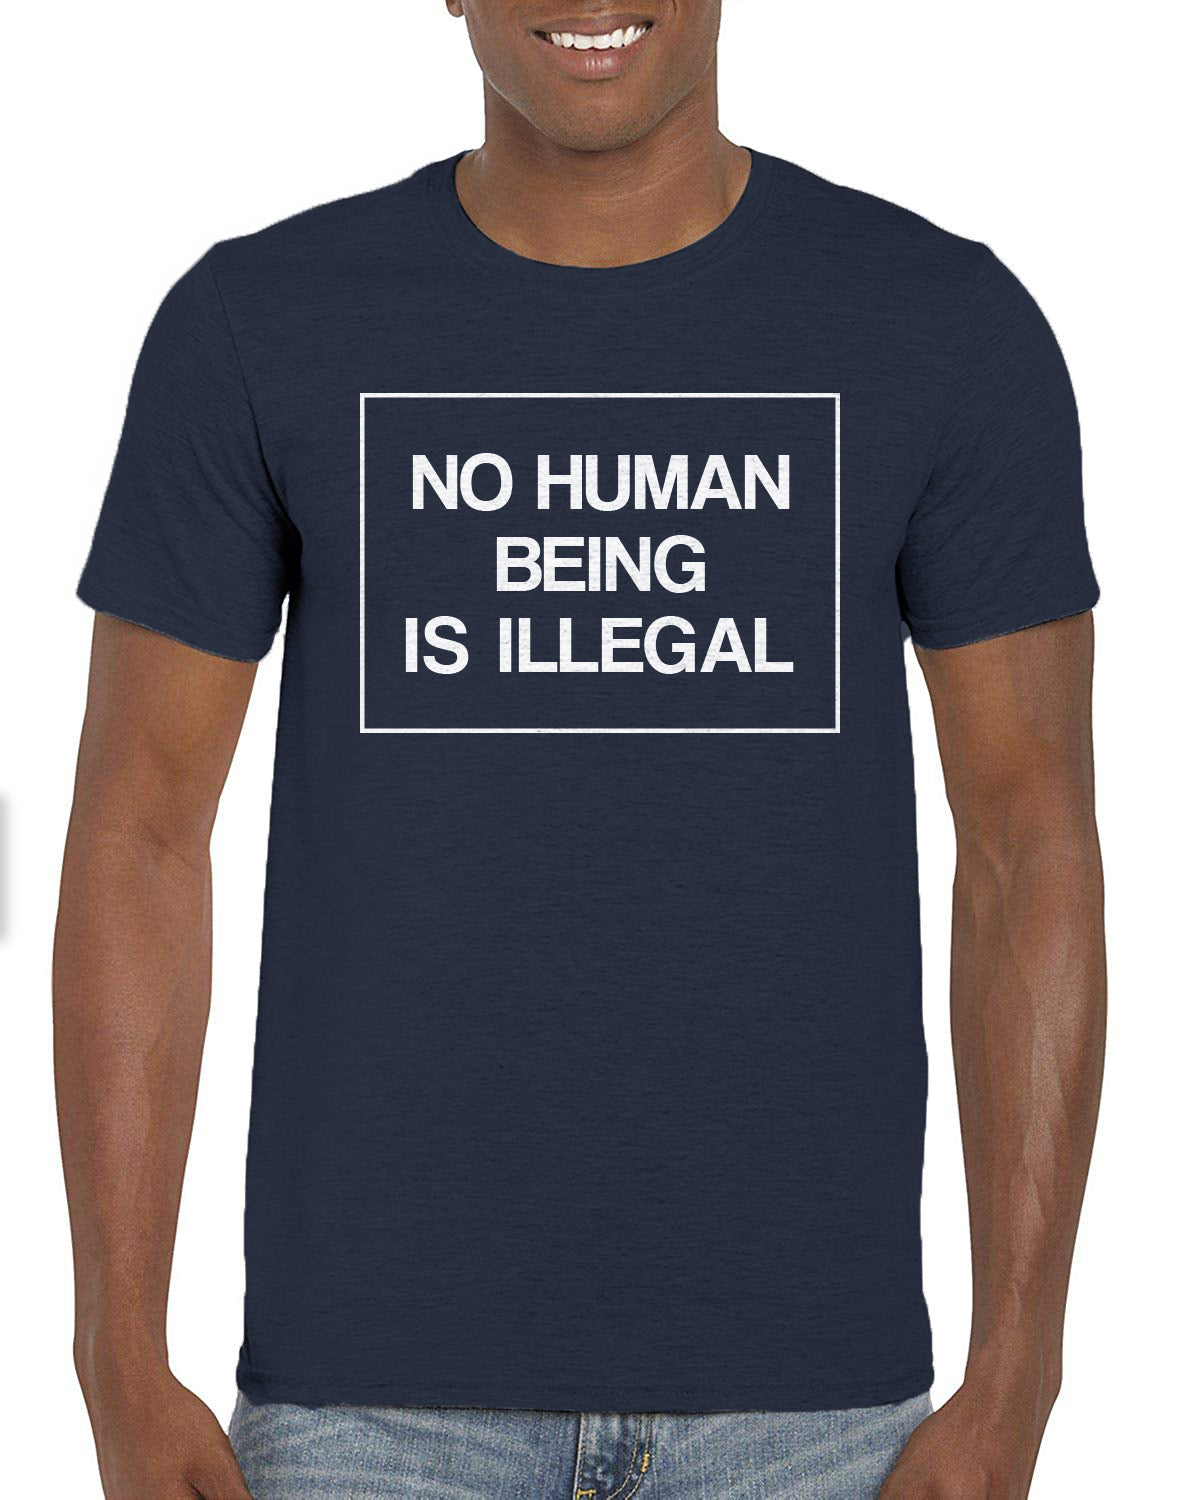 No Human Being is Illegal Unisex T-Shirt